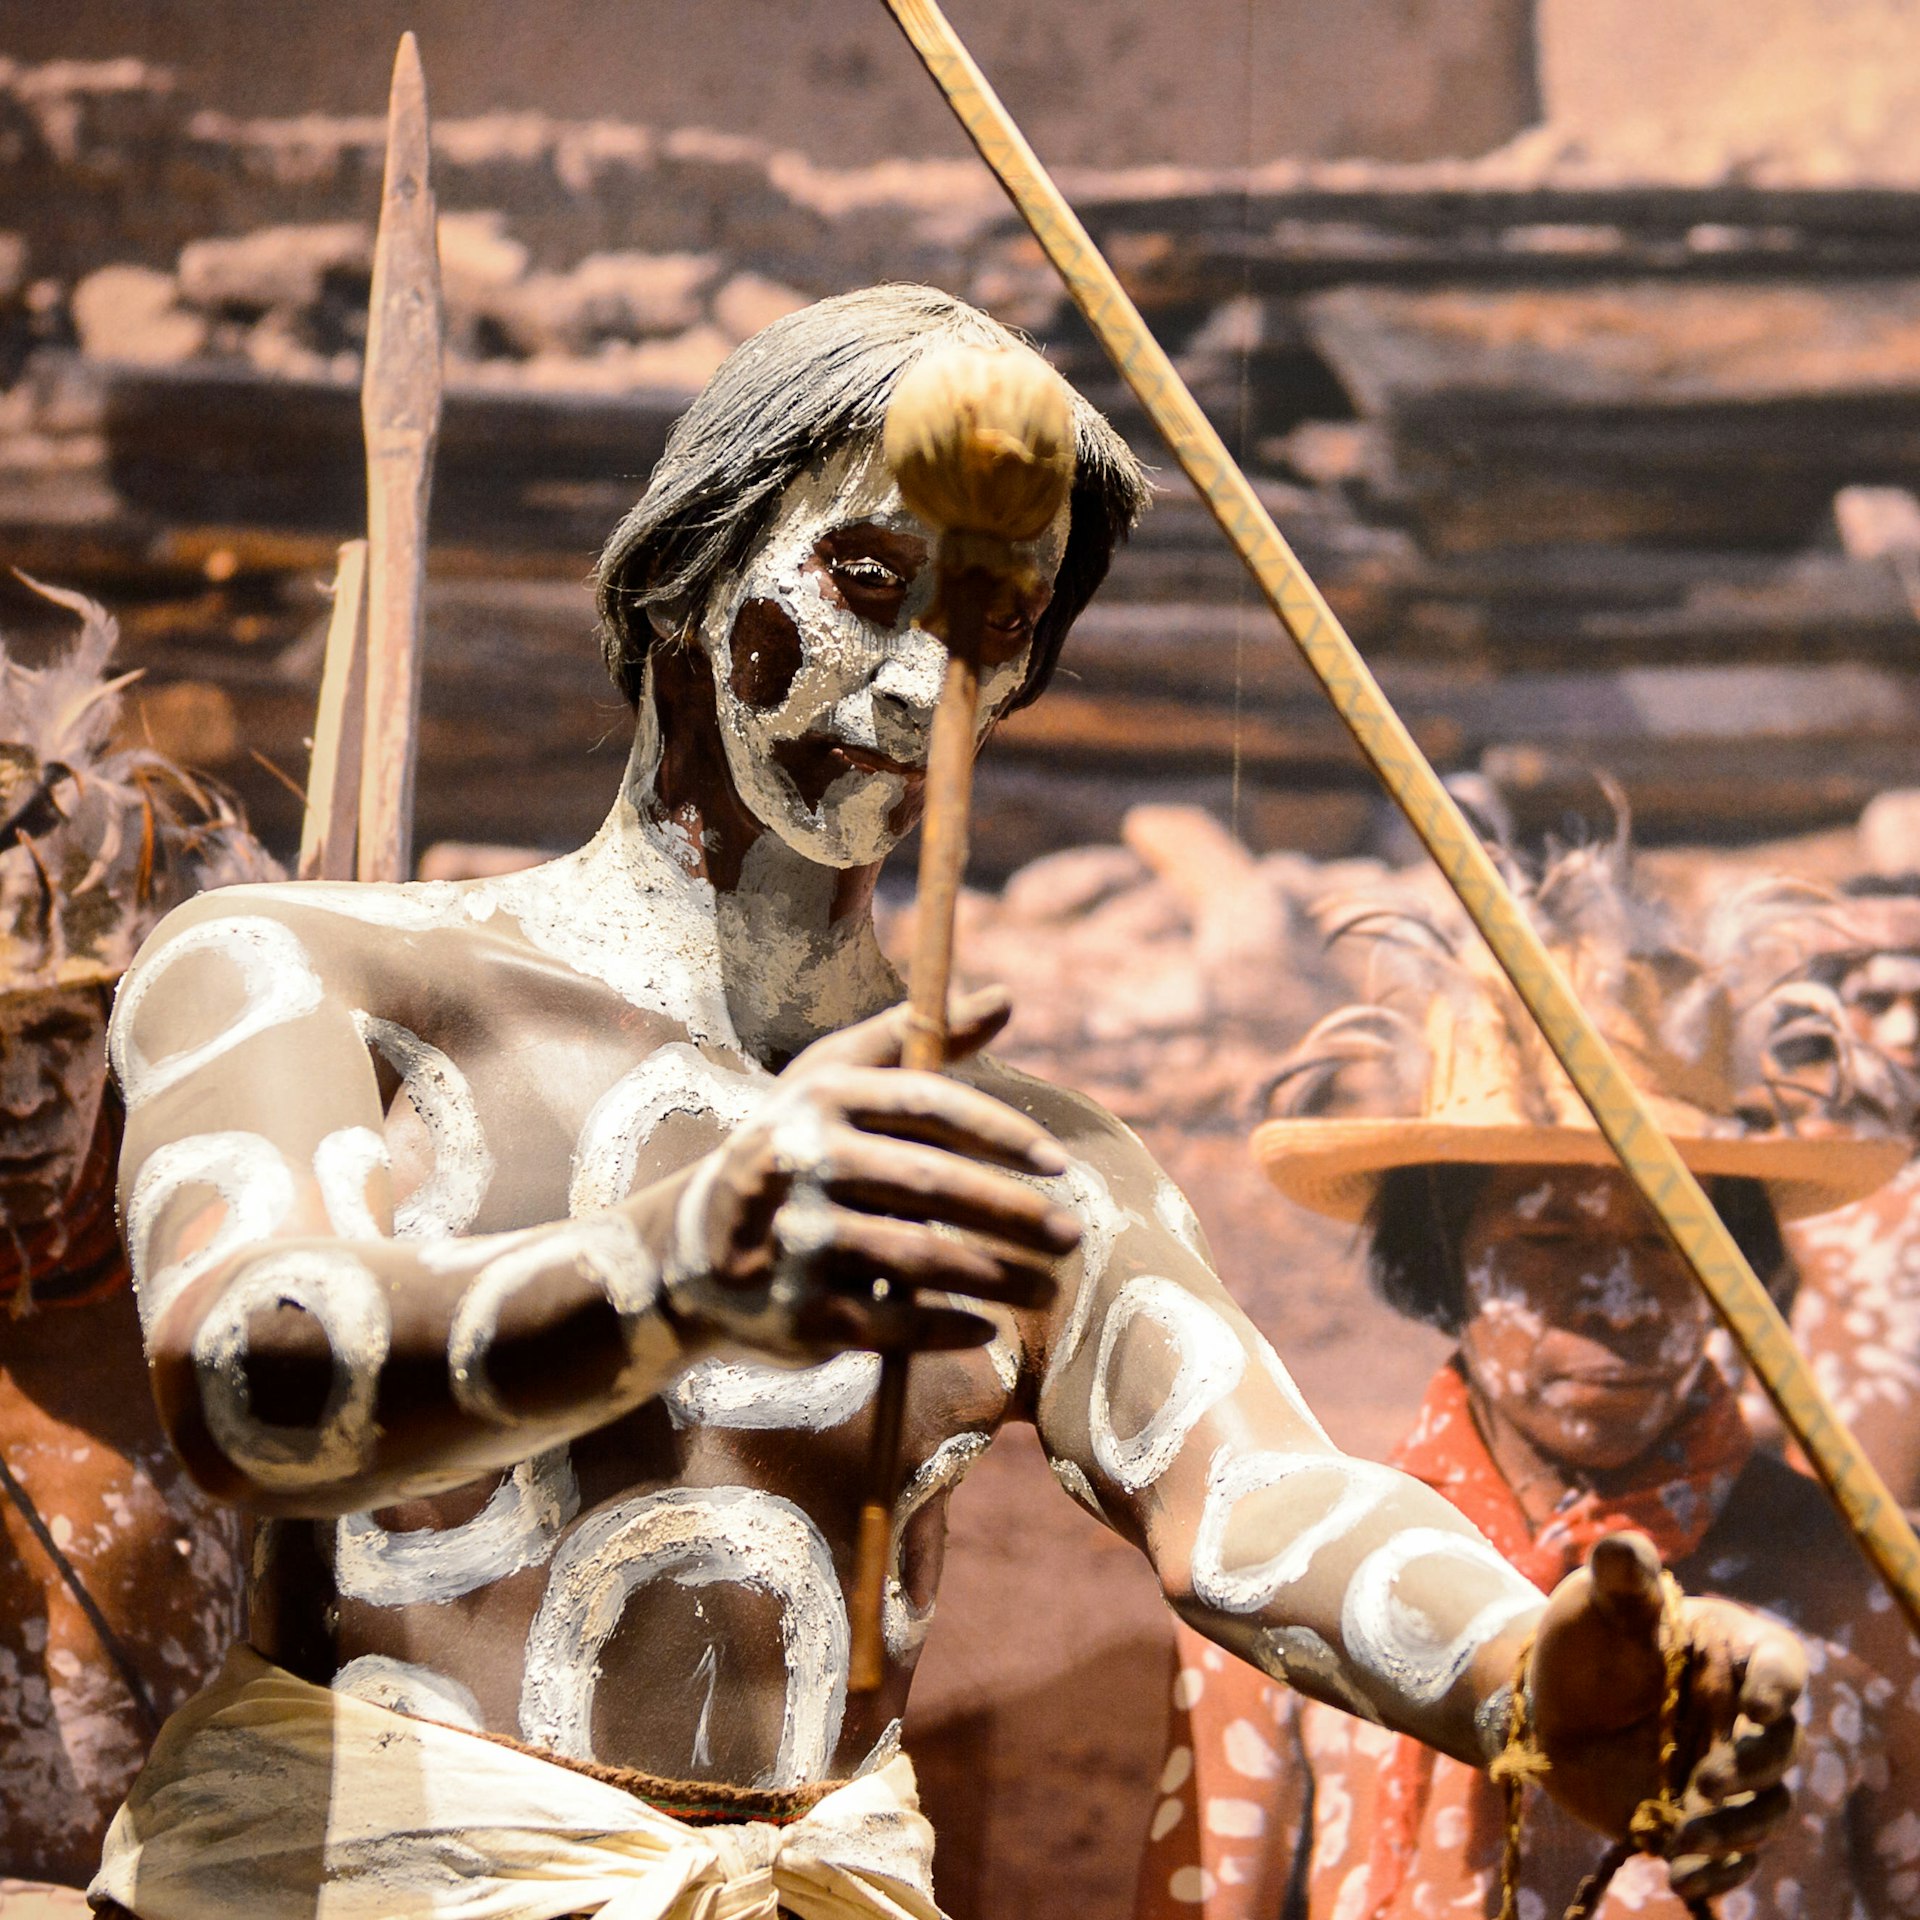 A recreation of Mexico's past in the National Museum of Anthropology